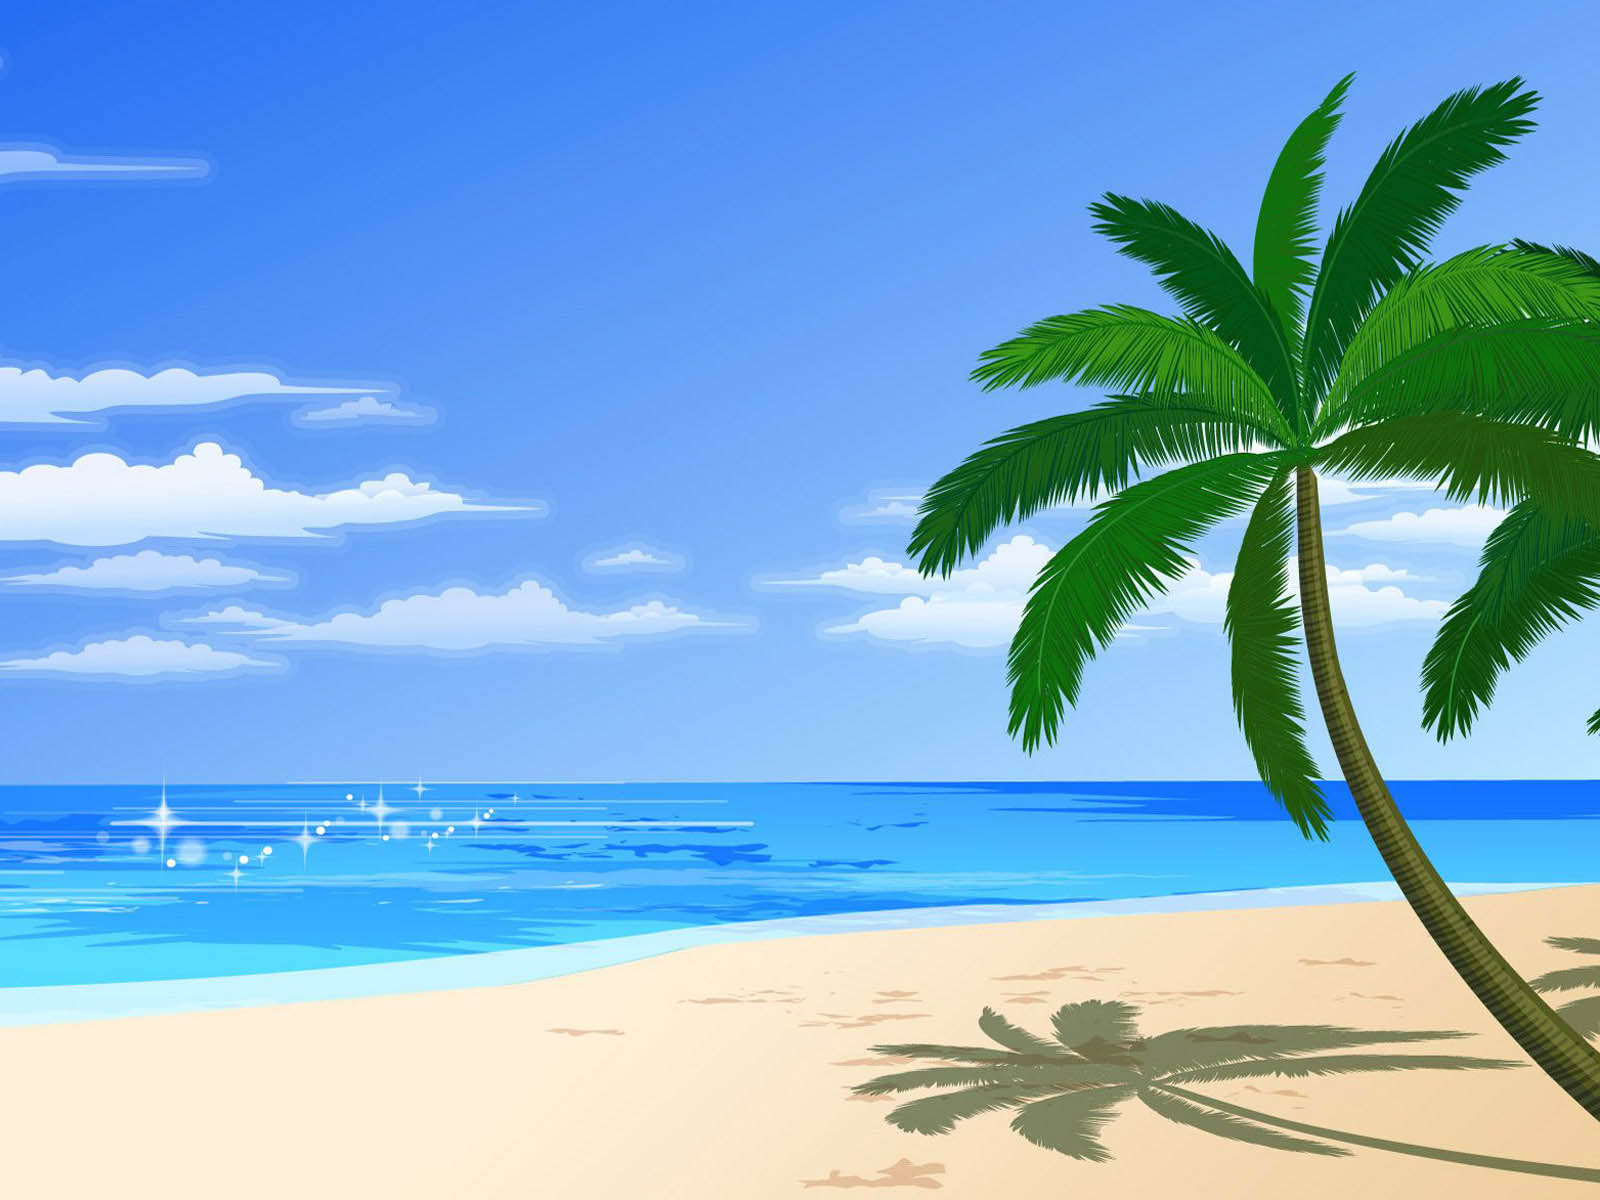  Beach Wallpapers Images Photos Pictures and Backgrounds for free